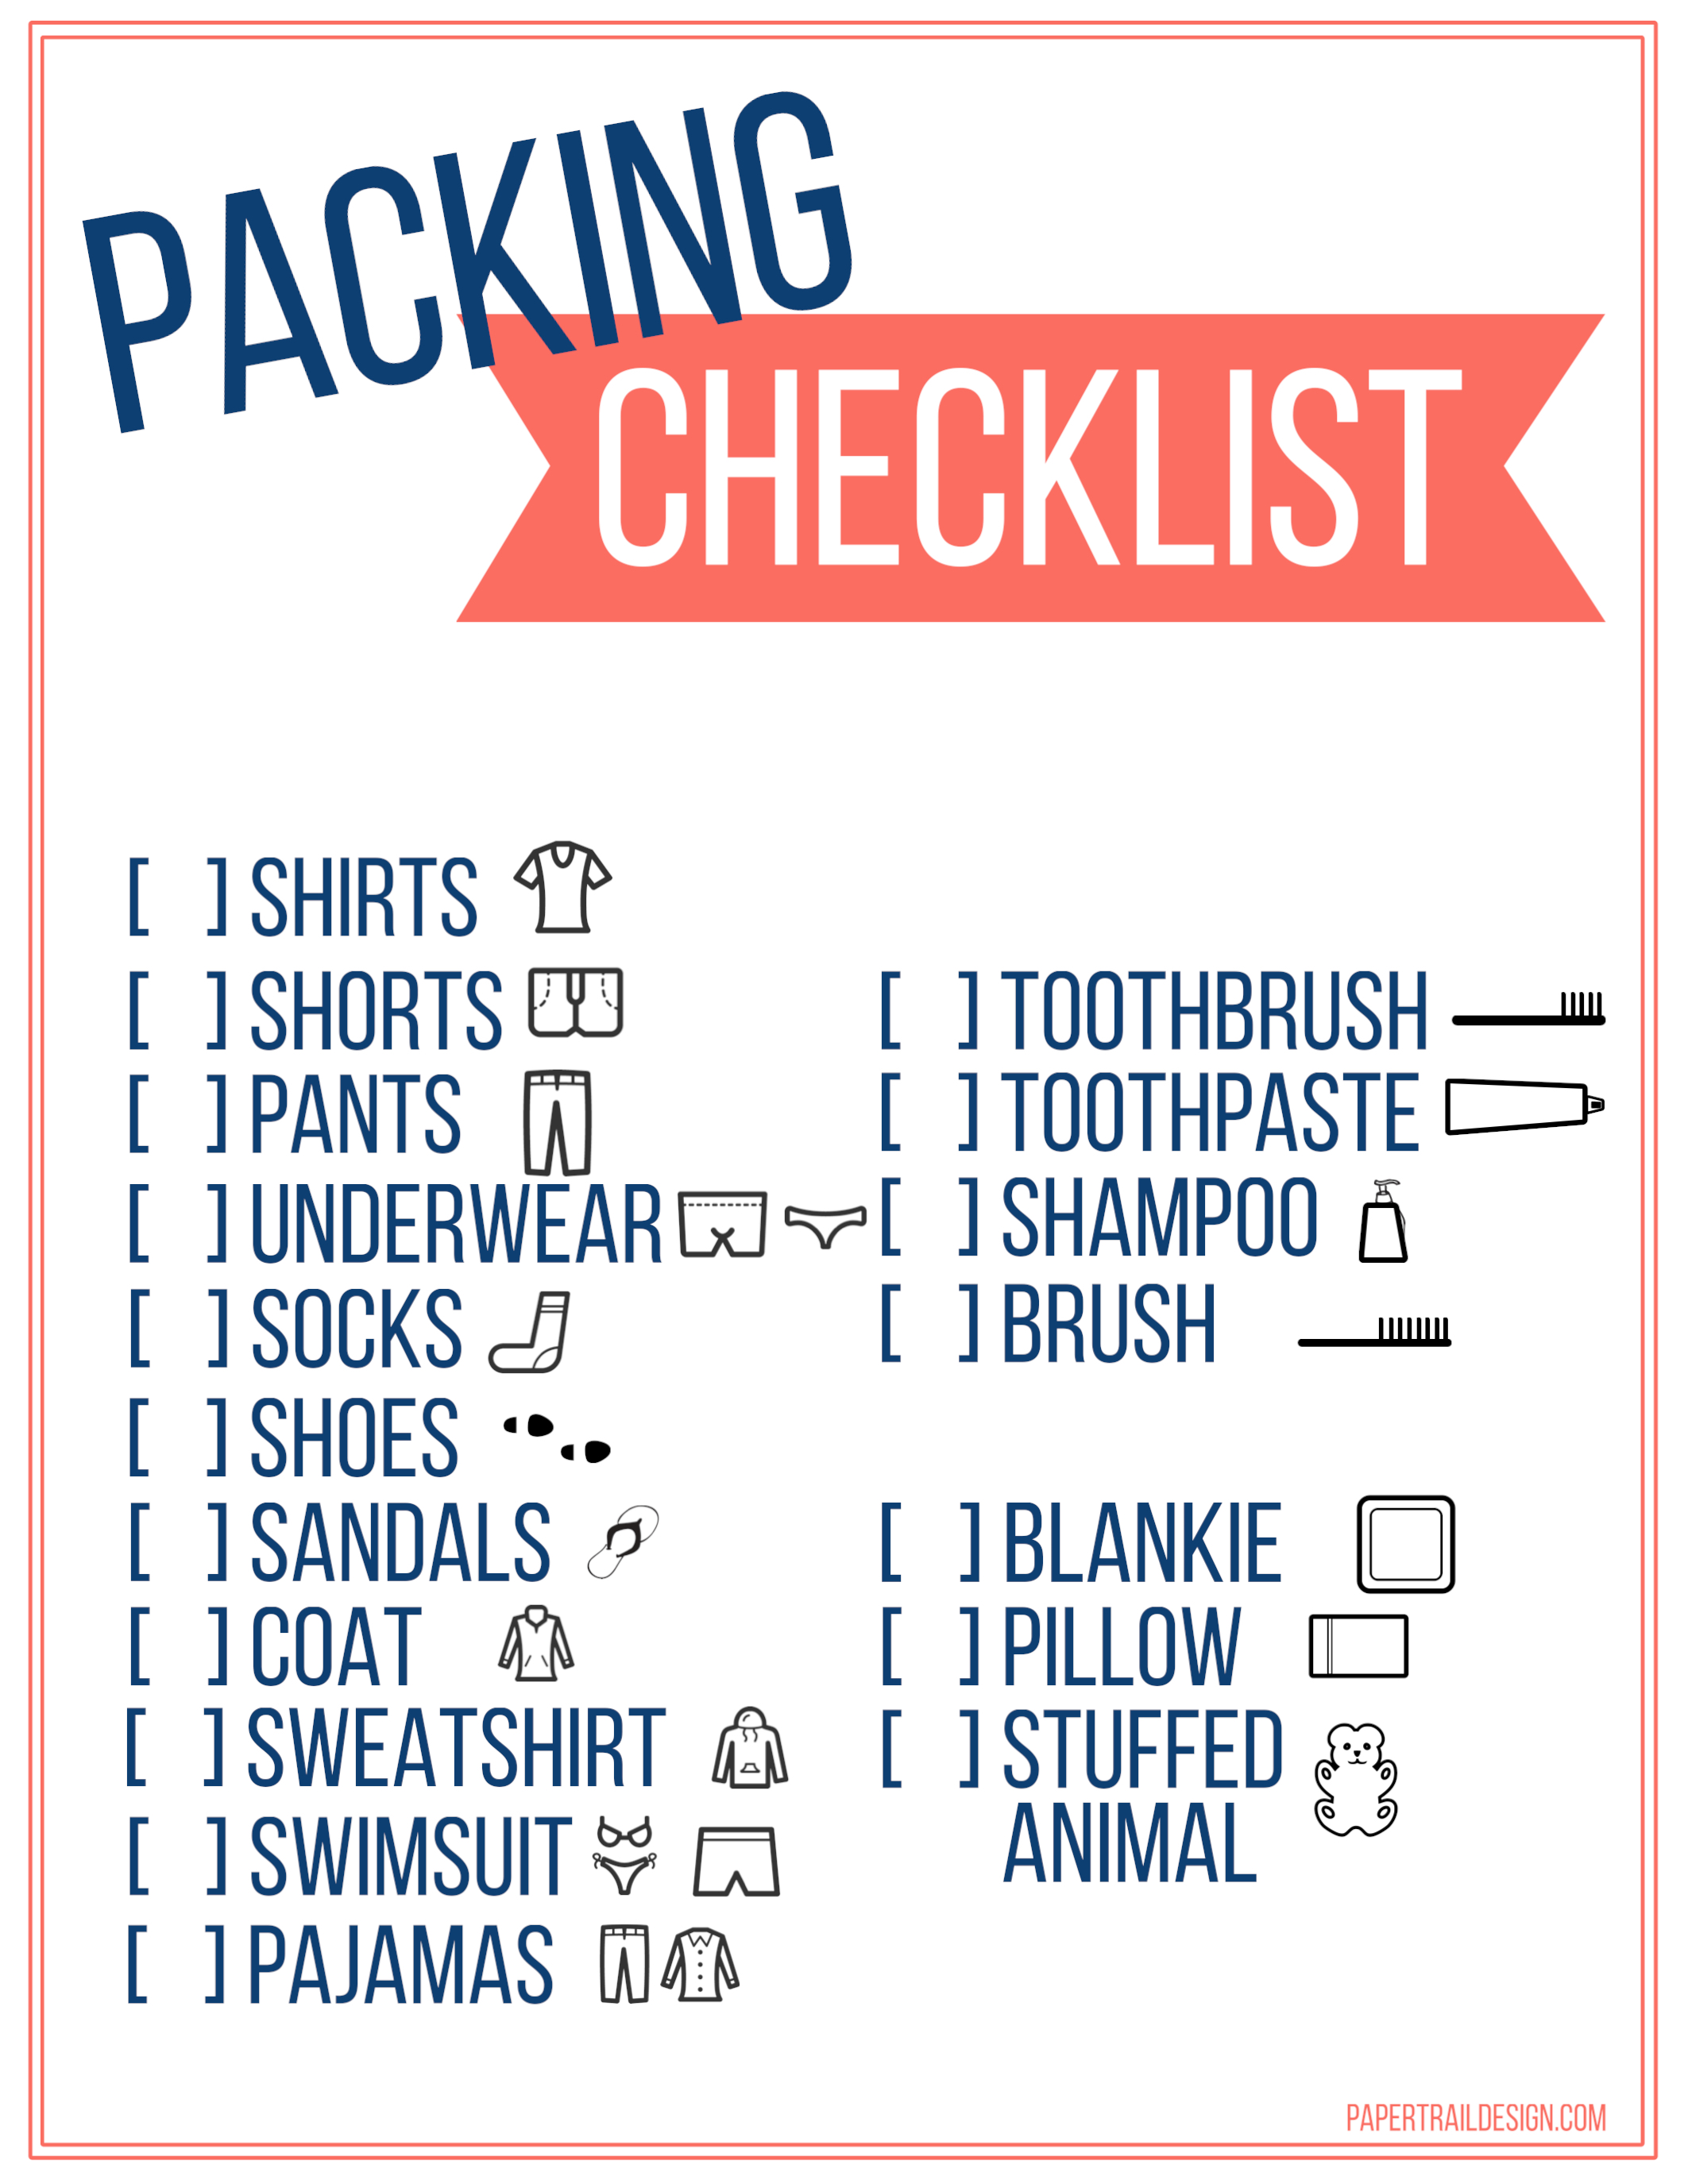 a-vacation-packing-checklist-you-need-to-download